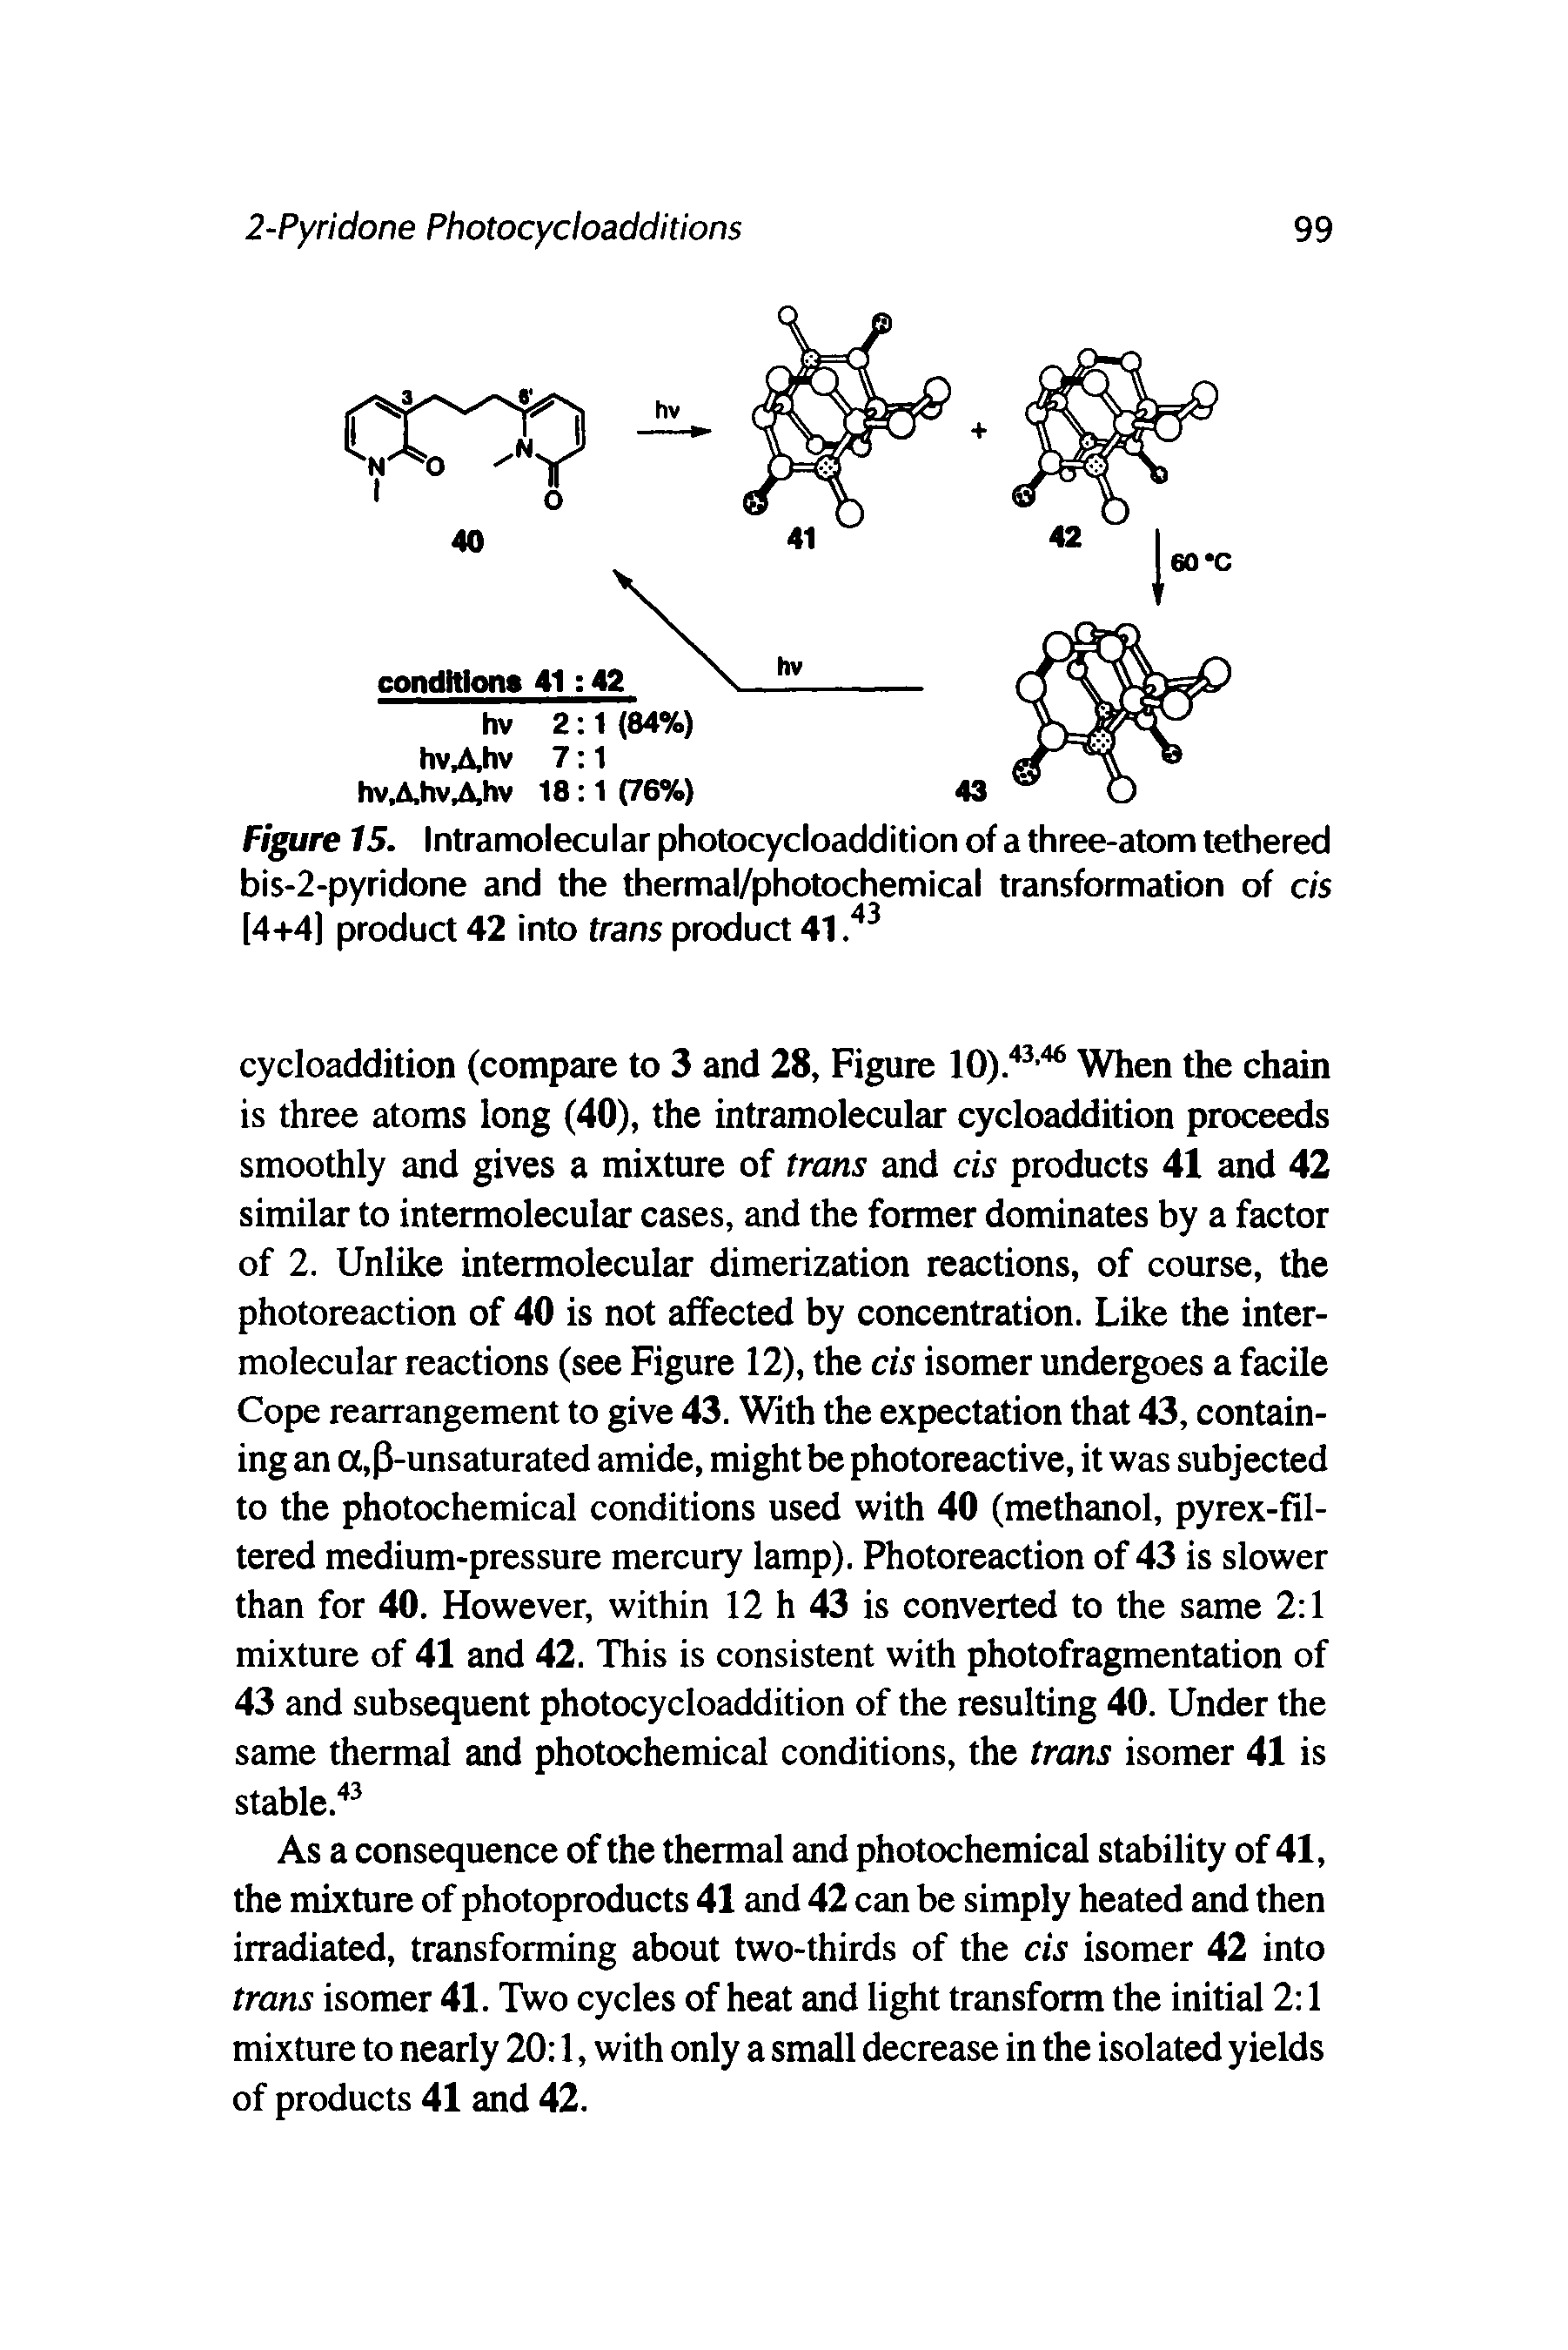 Figure 15. Intramolecu lar photocycloaddition of a three-atom tethered bis-2-pyridone and the thermal/photochemical transformation of cis [4+4] product 42 into trans product 41...